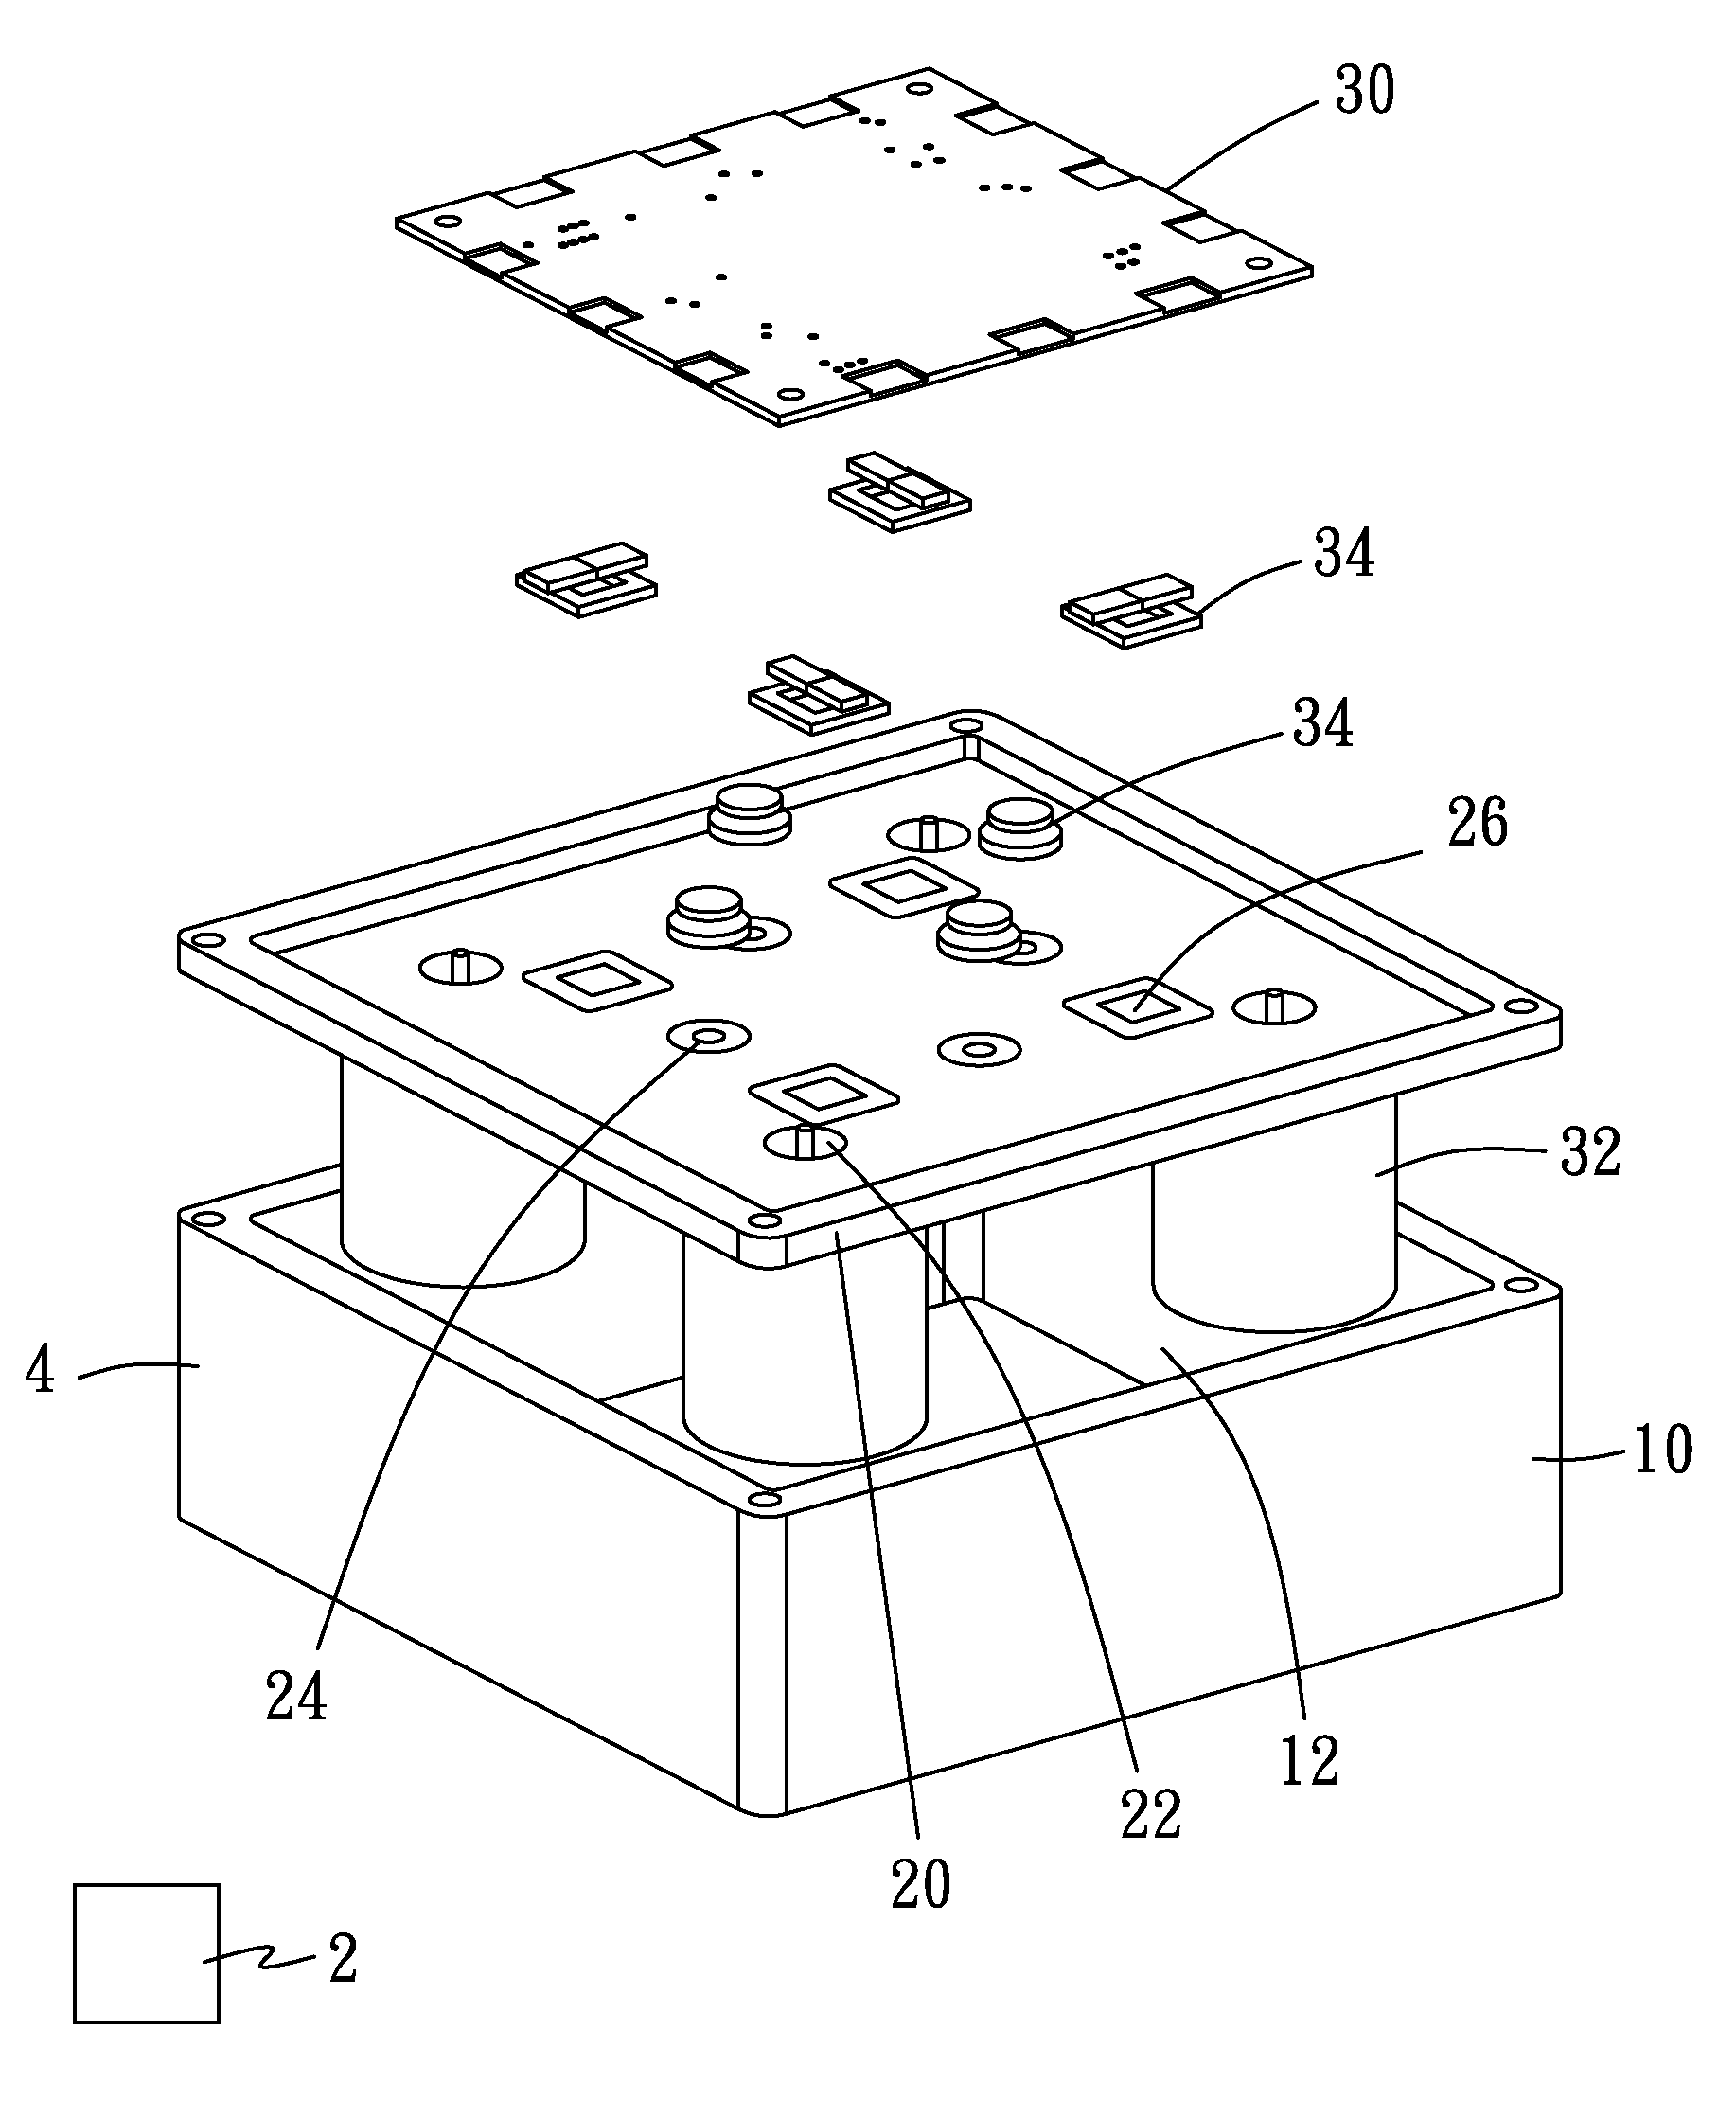 Six-degree-of-freedom precision positioning system